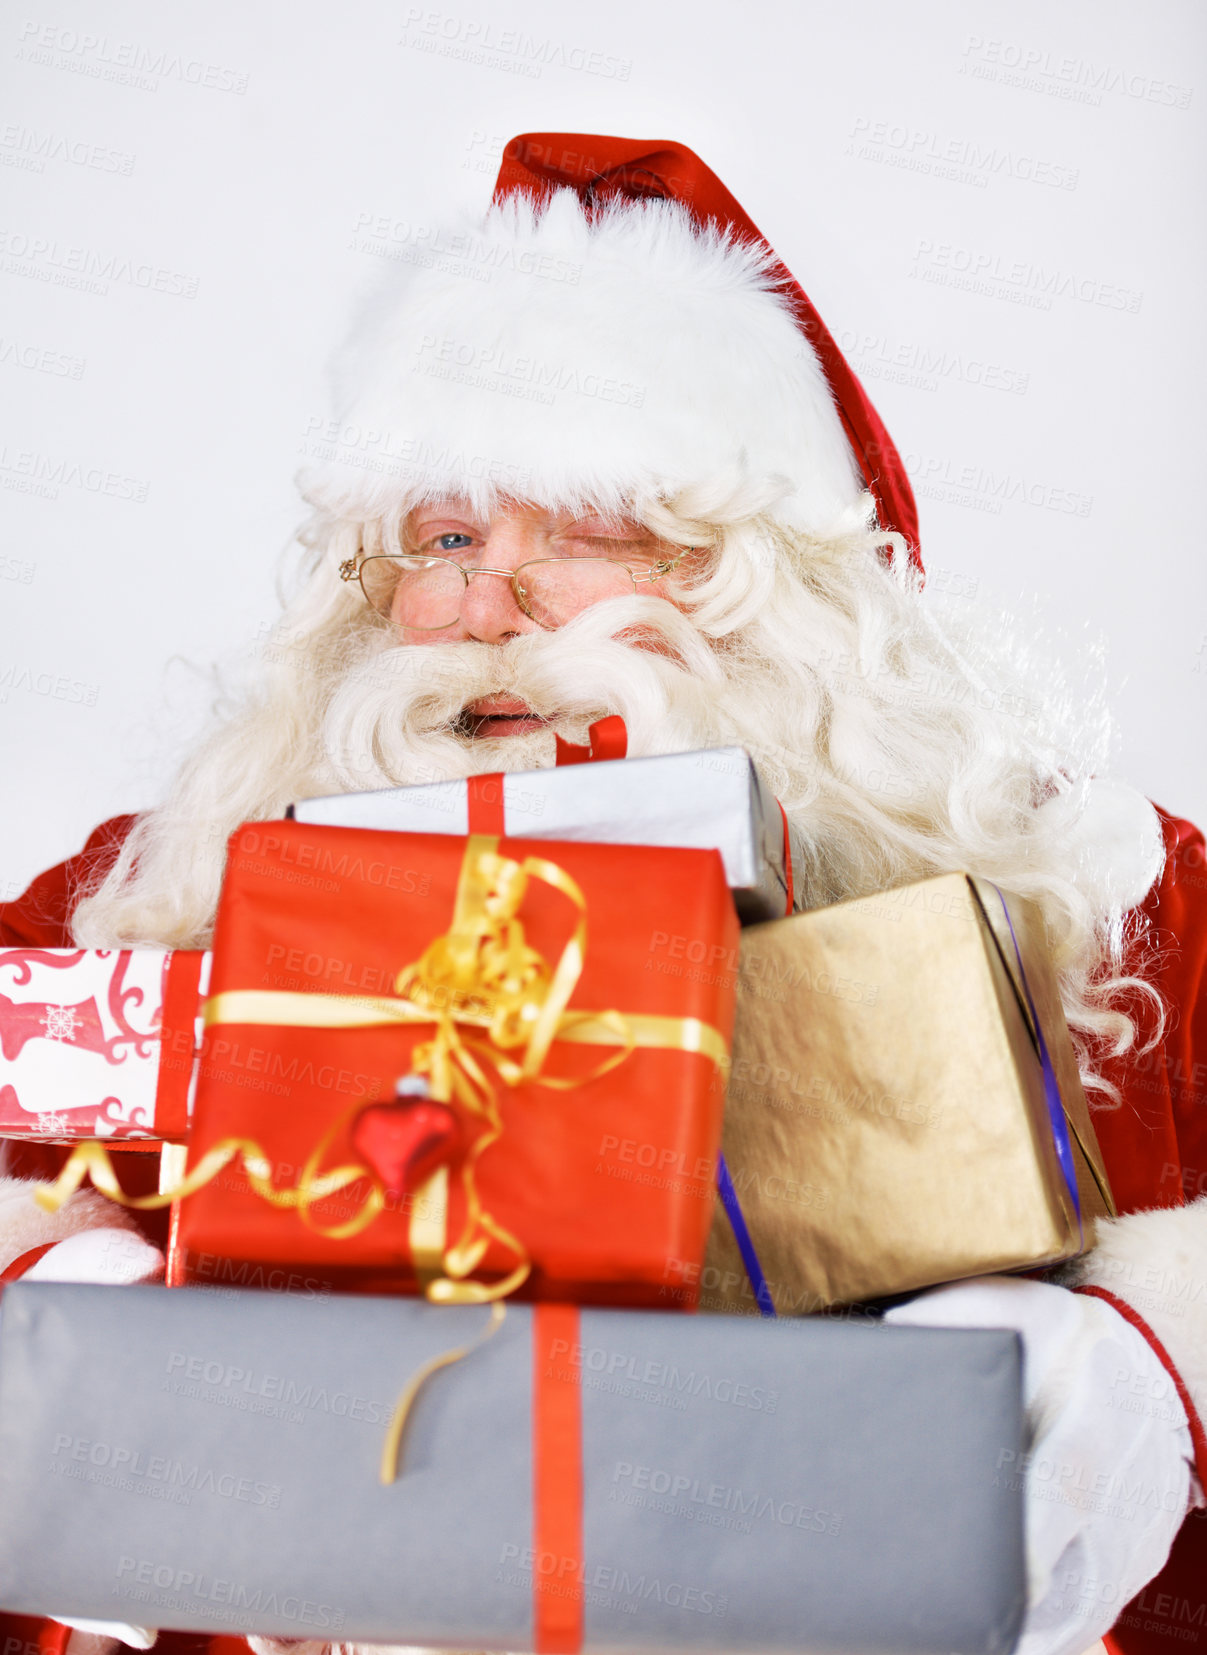 Buy stock photo Wink, Christmas gifts and portrait of Santa Claus in studio on white background. Xmas, costume and man with glasses holding pile of presents for happy December holiday celebrations or festive party